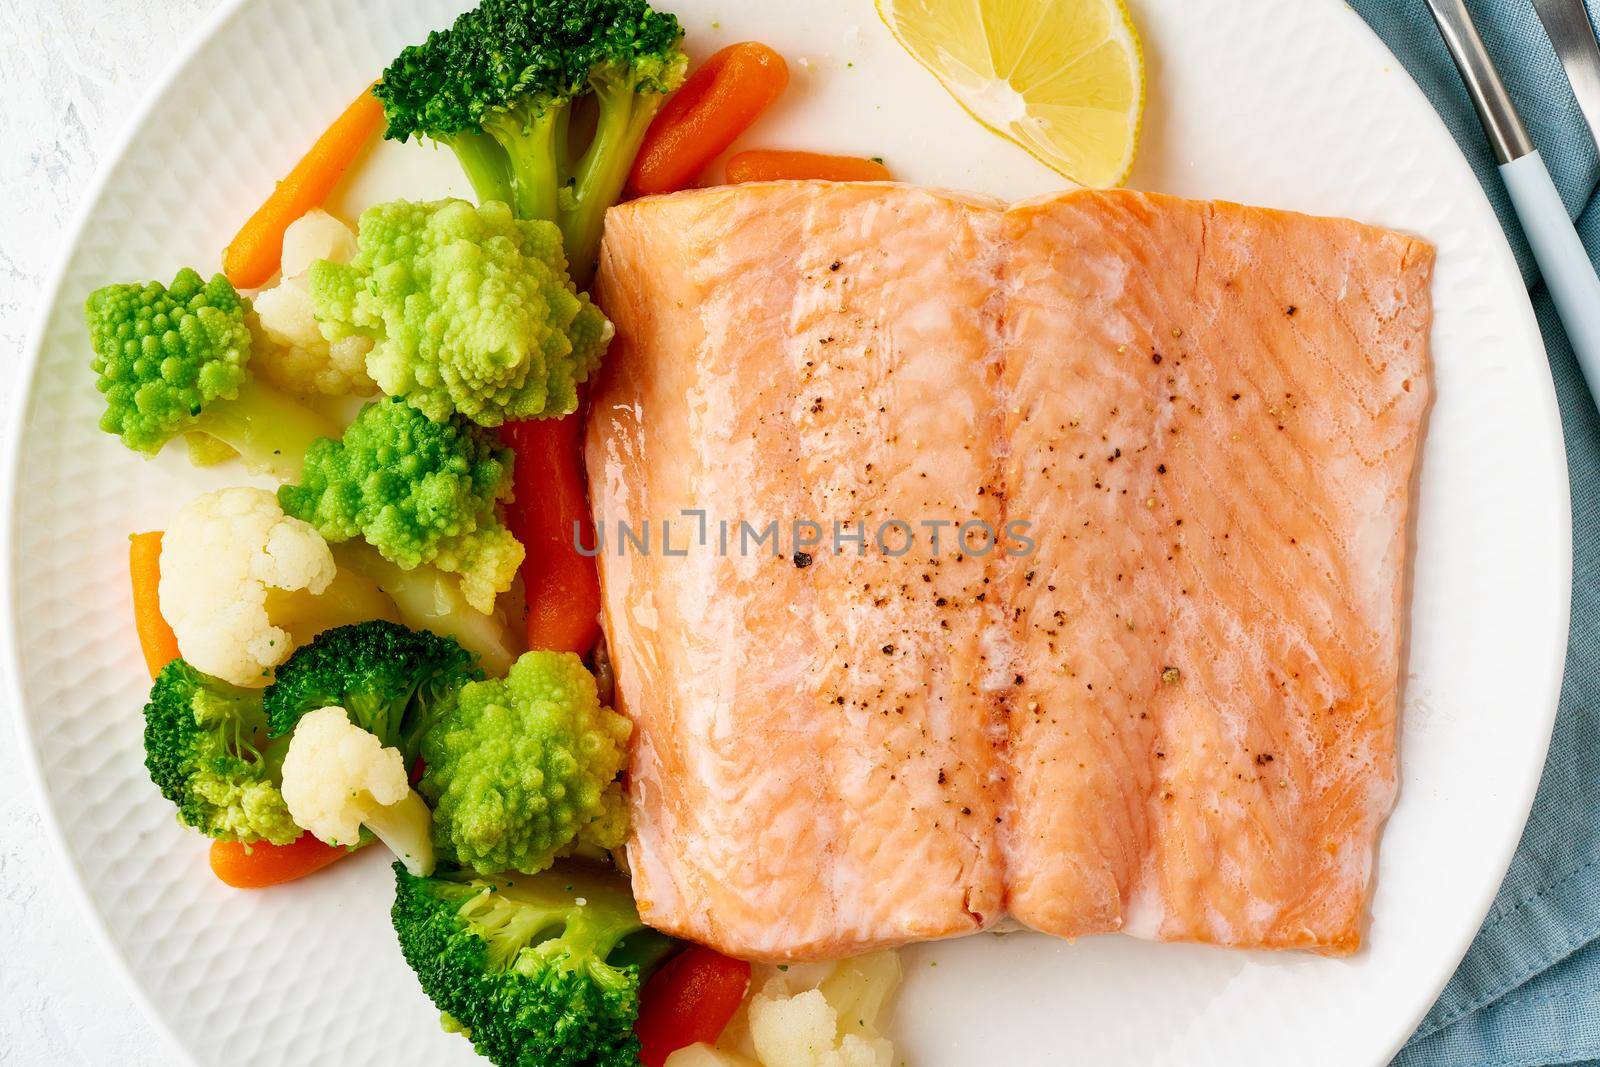 Macro steamed salmon and vegetables, Paleo, keto, fodmap, dash diet. Mediterranean diet with steam fish. Healthy concept, white plate on gray table, gluten free, lectine free, top view